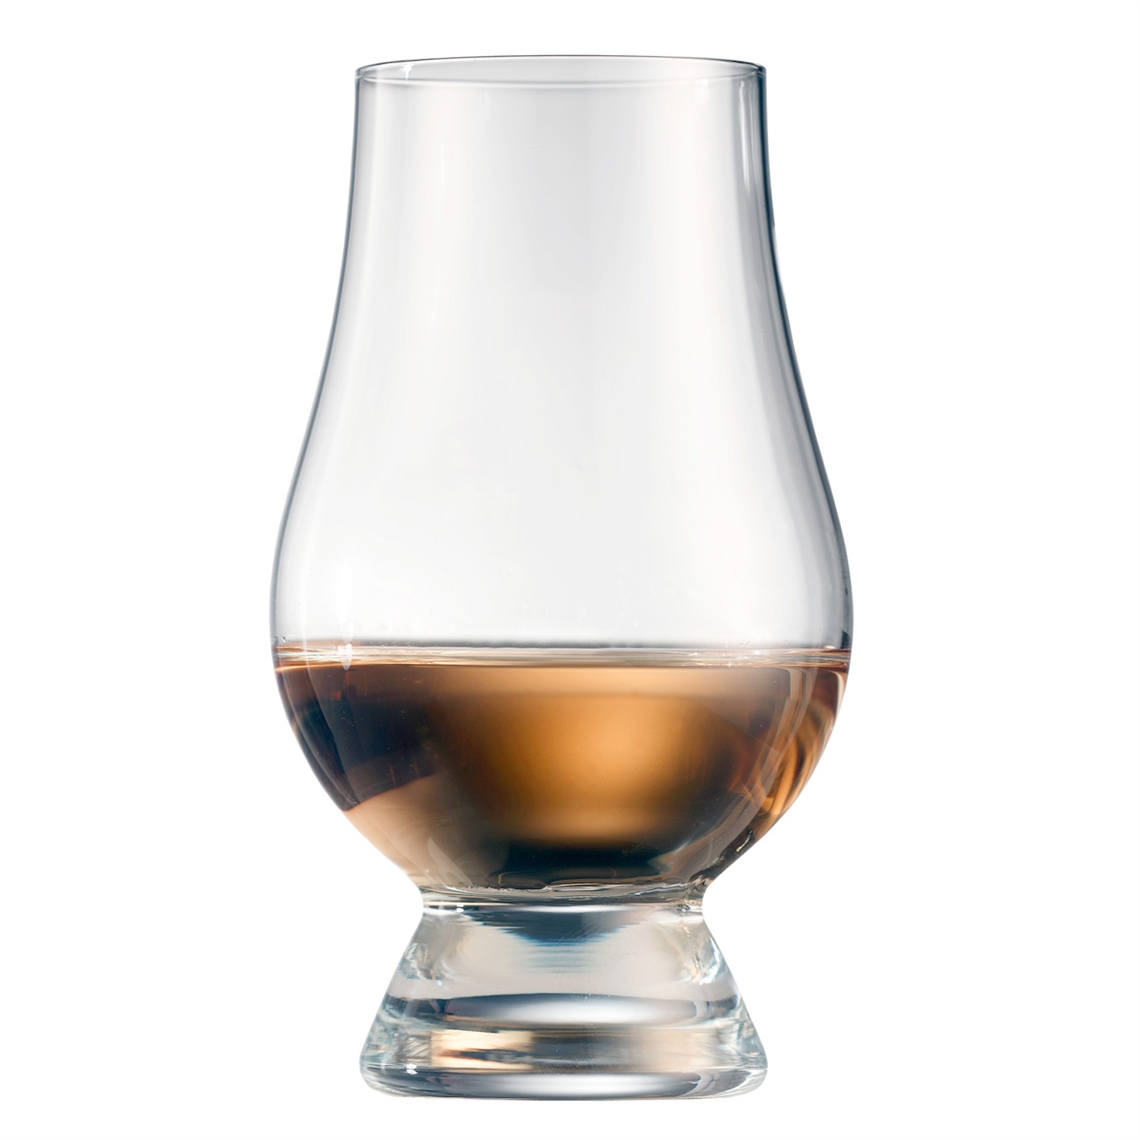 View more large wine glasses from our Whisky Glasses range